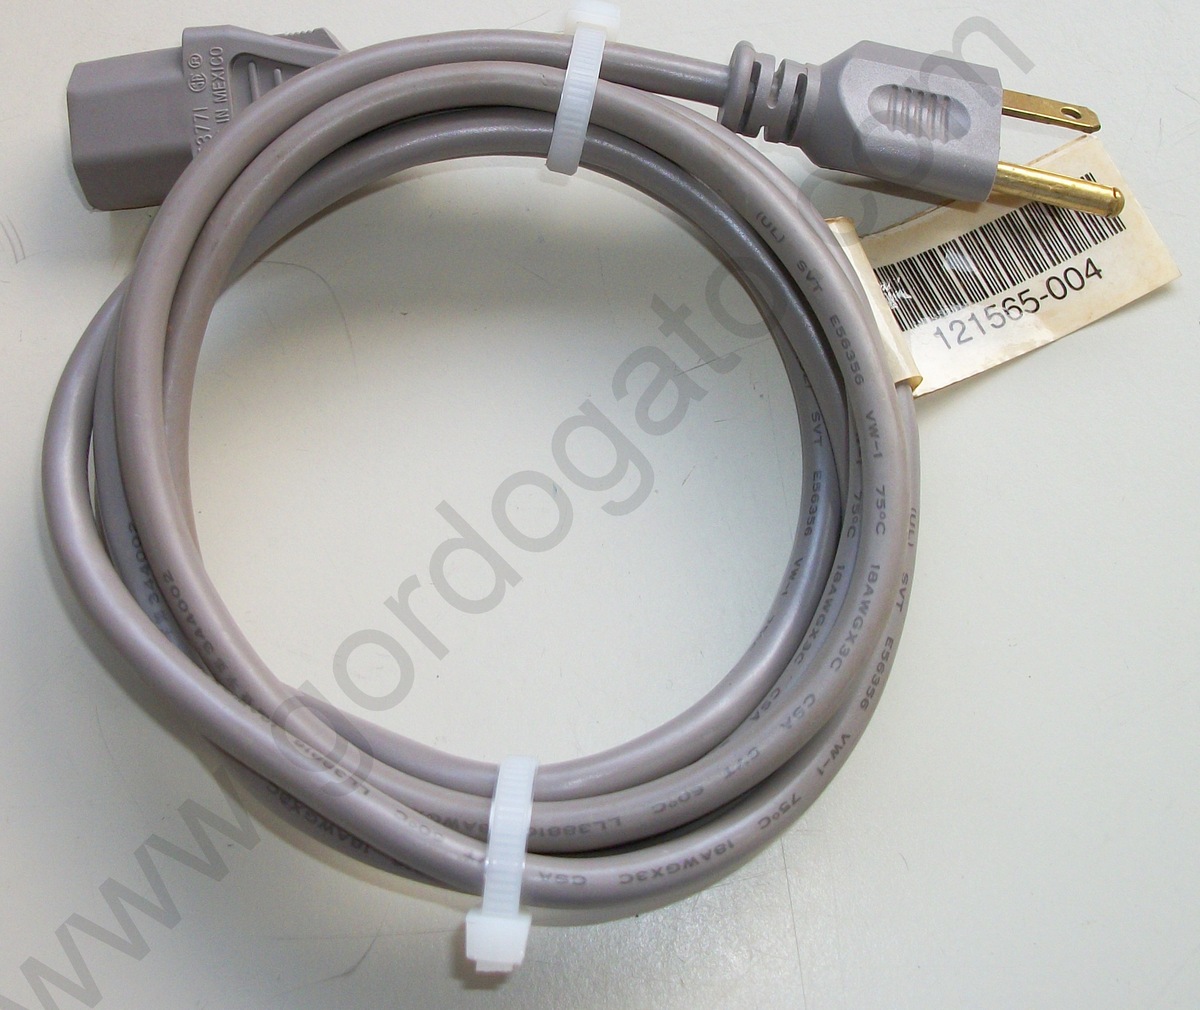 HP Compaq Power Cable Cord 6' 121565-004